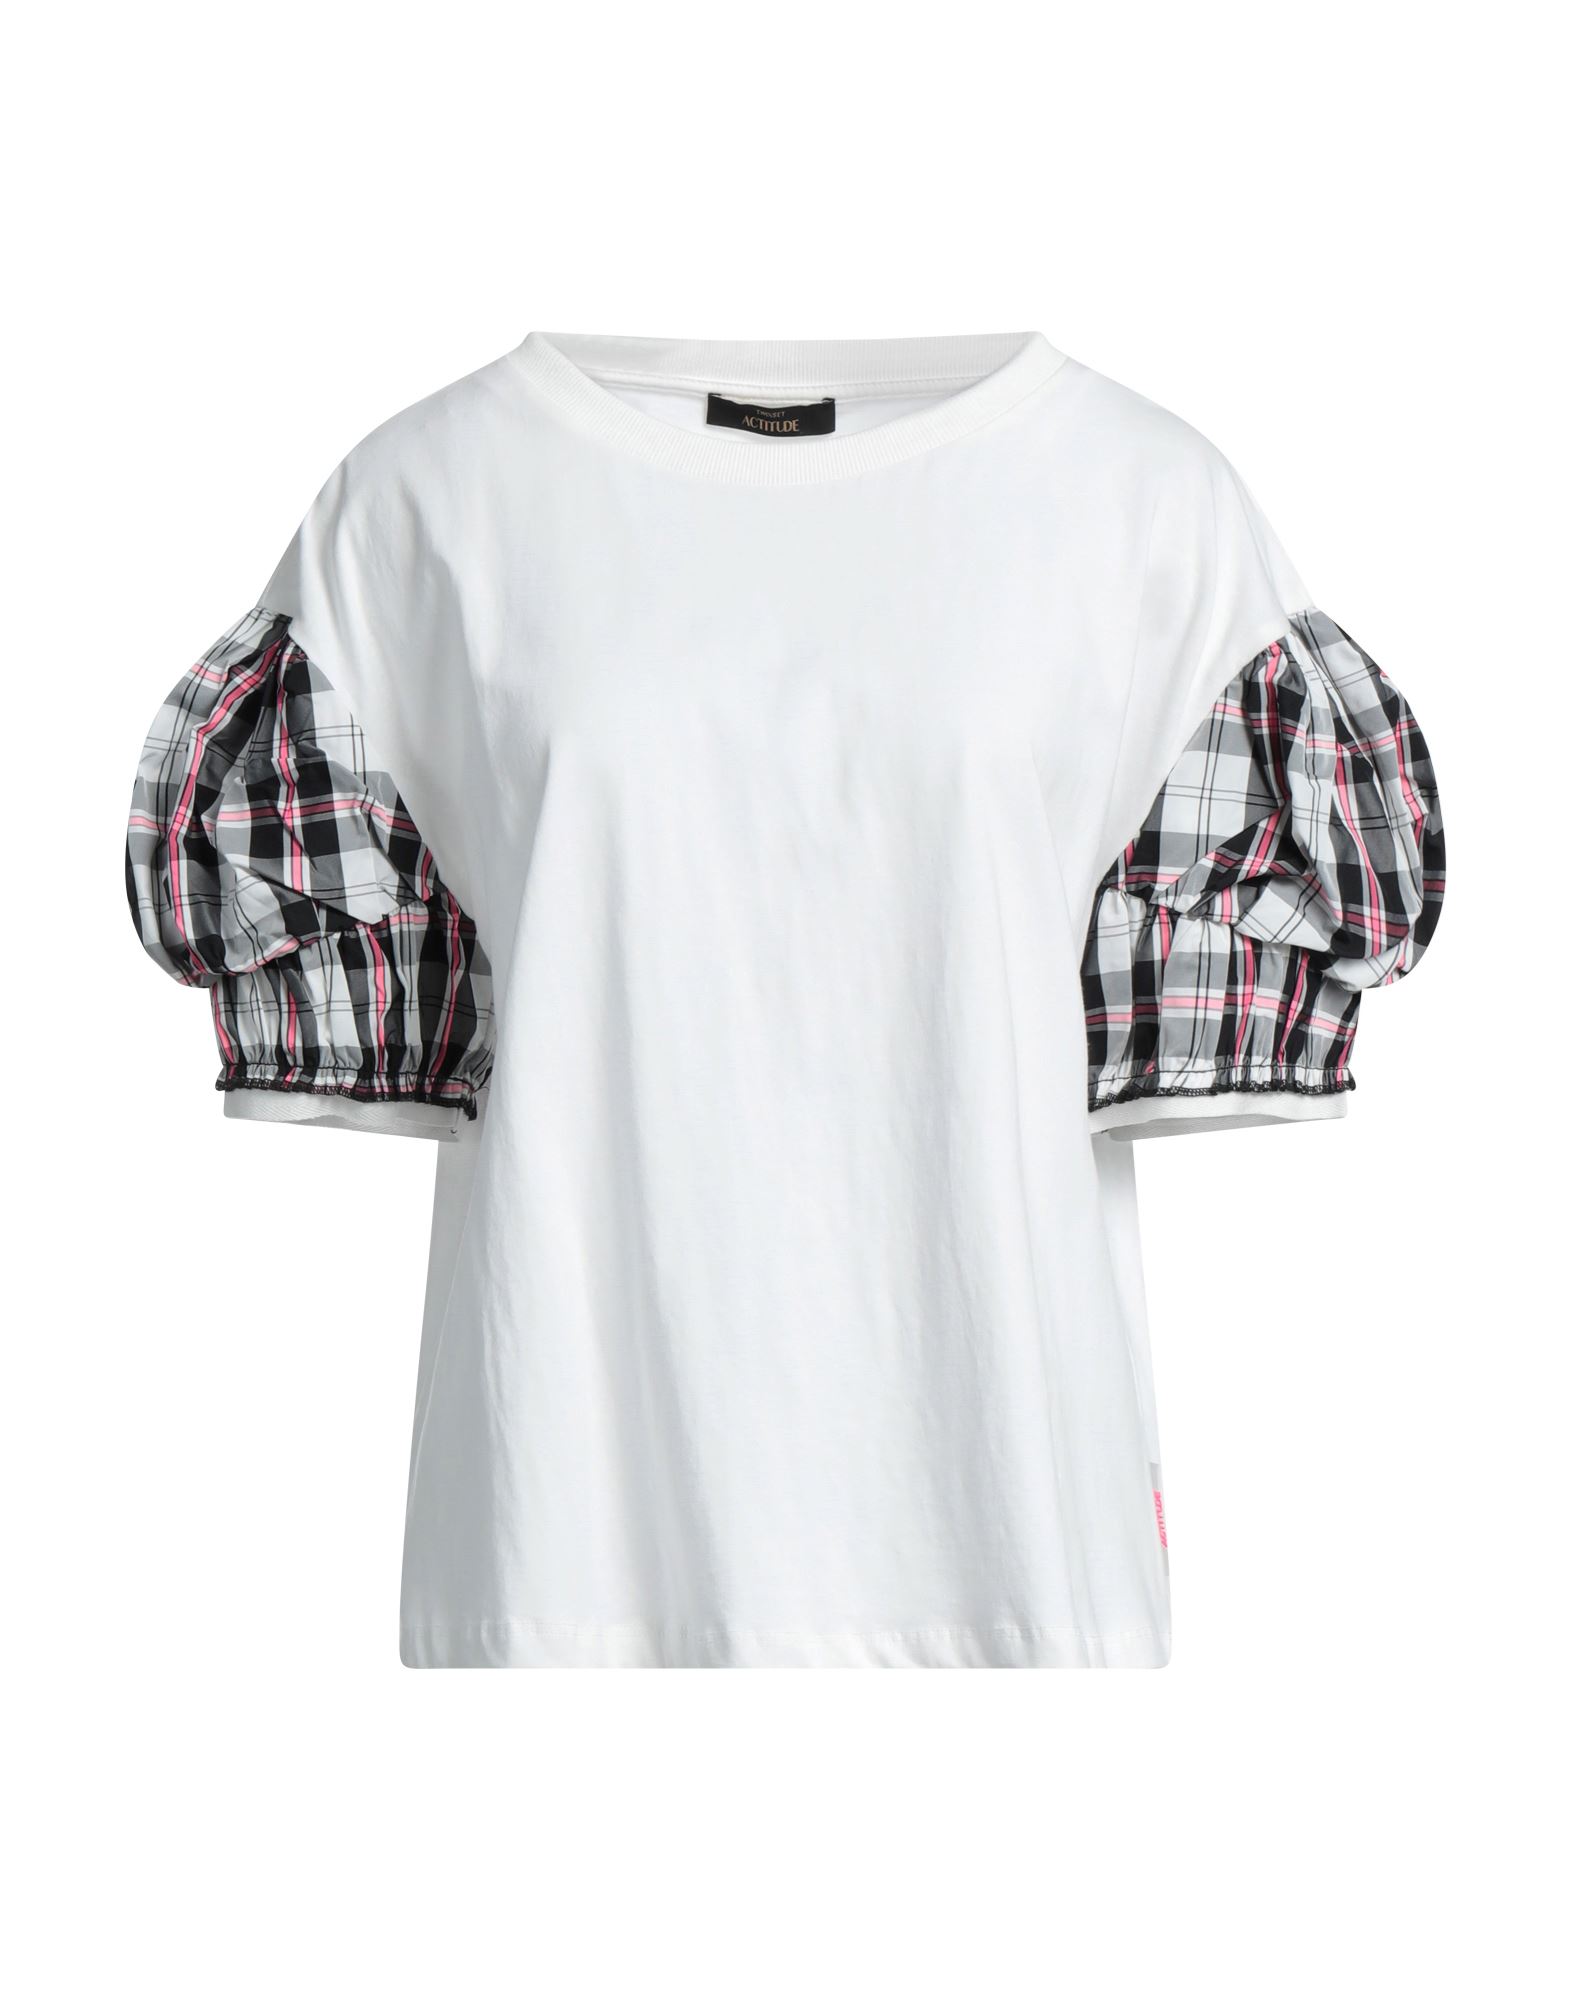 ACTITUDE by TWINSET T-shirts Damen Weiß von ACTITUDE by TWINSET